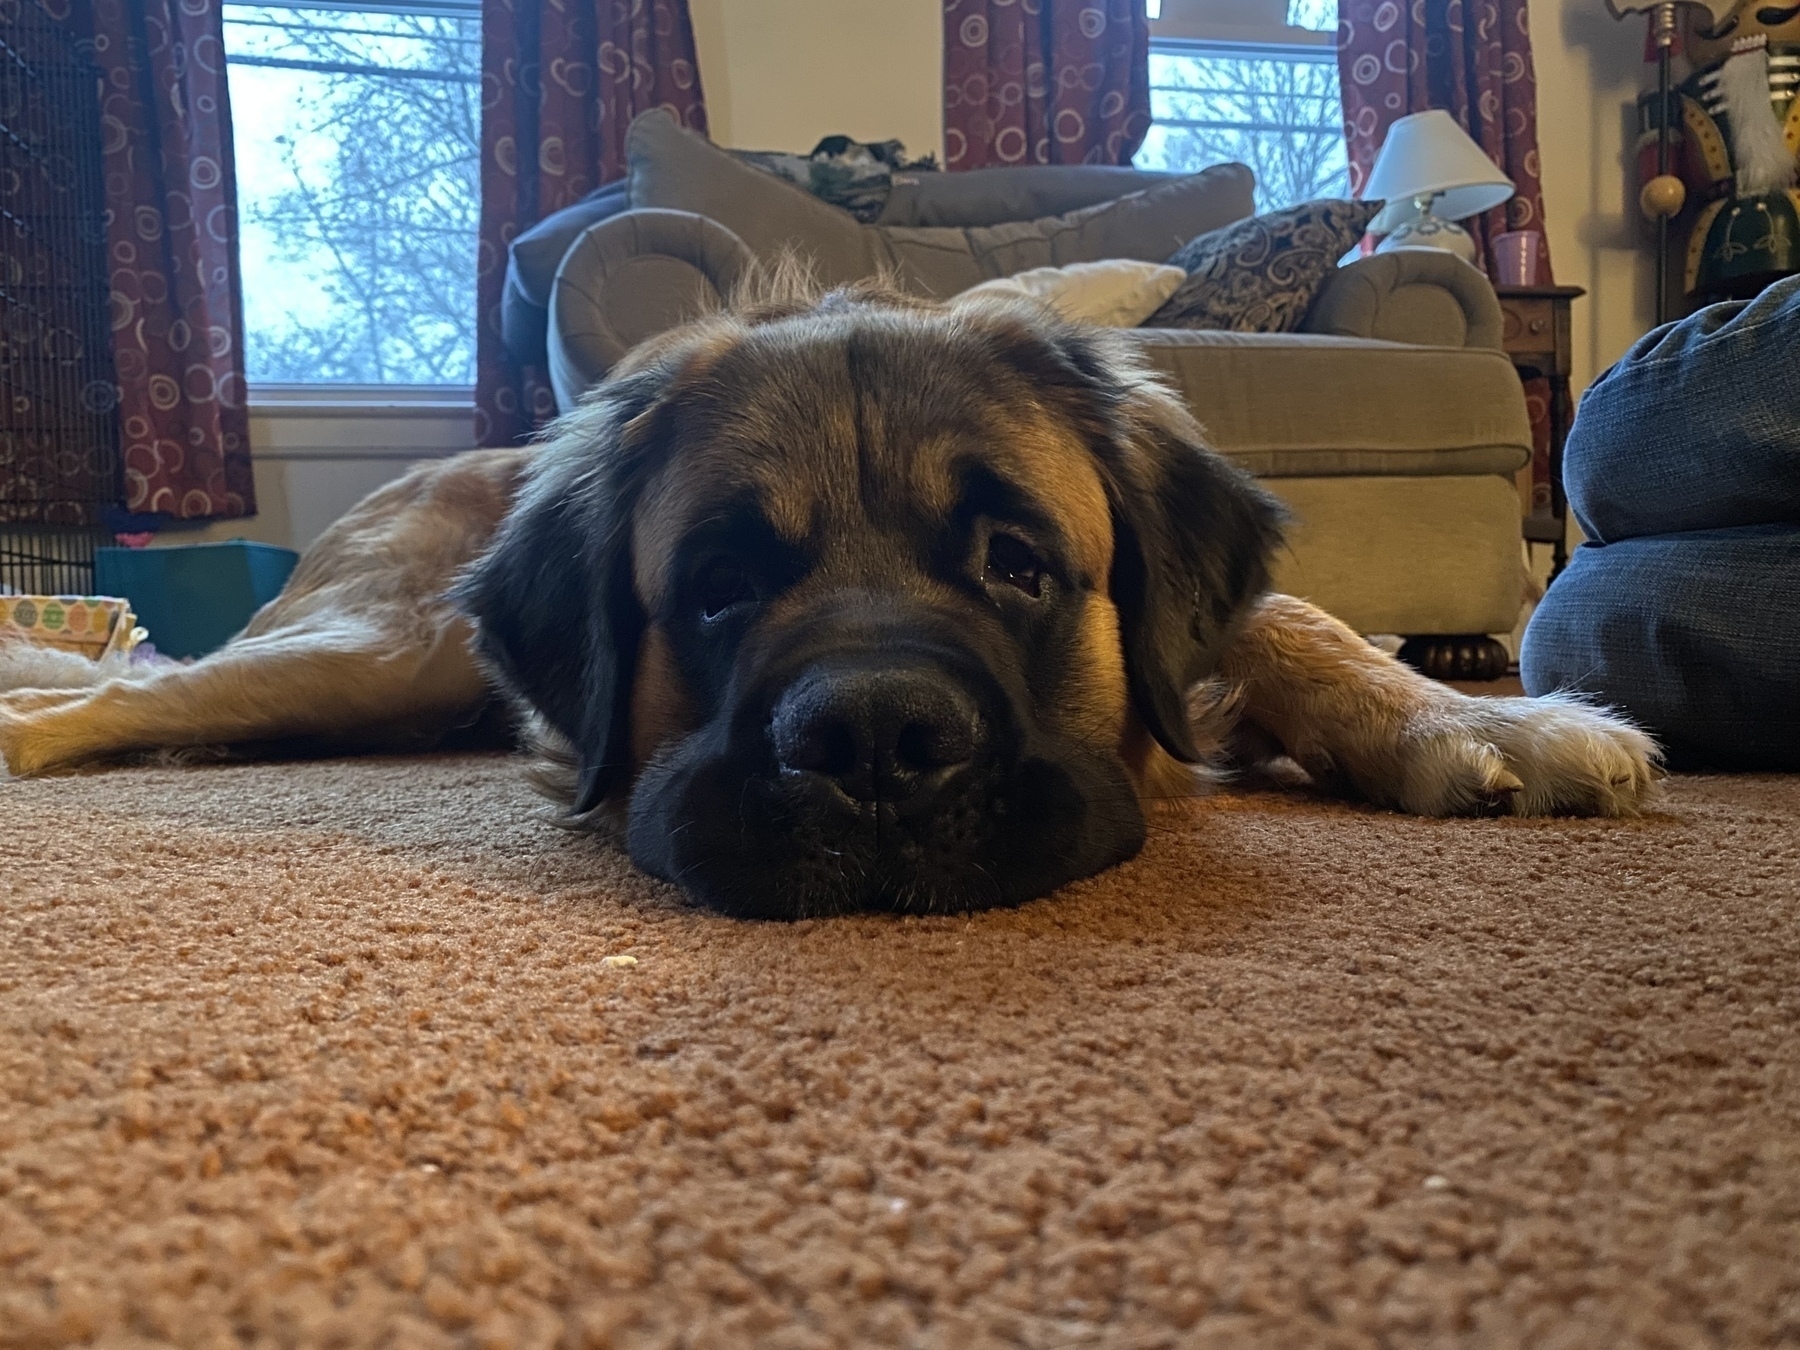 A black/tan Saint Bernard/Golden Retriever laying on the floor with his face flattened out.